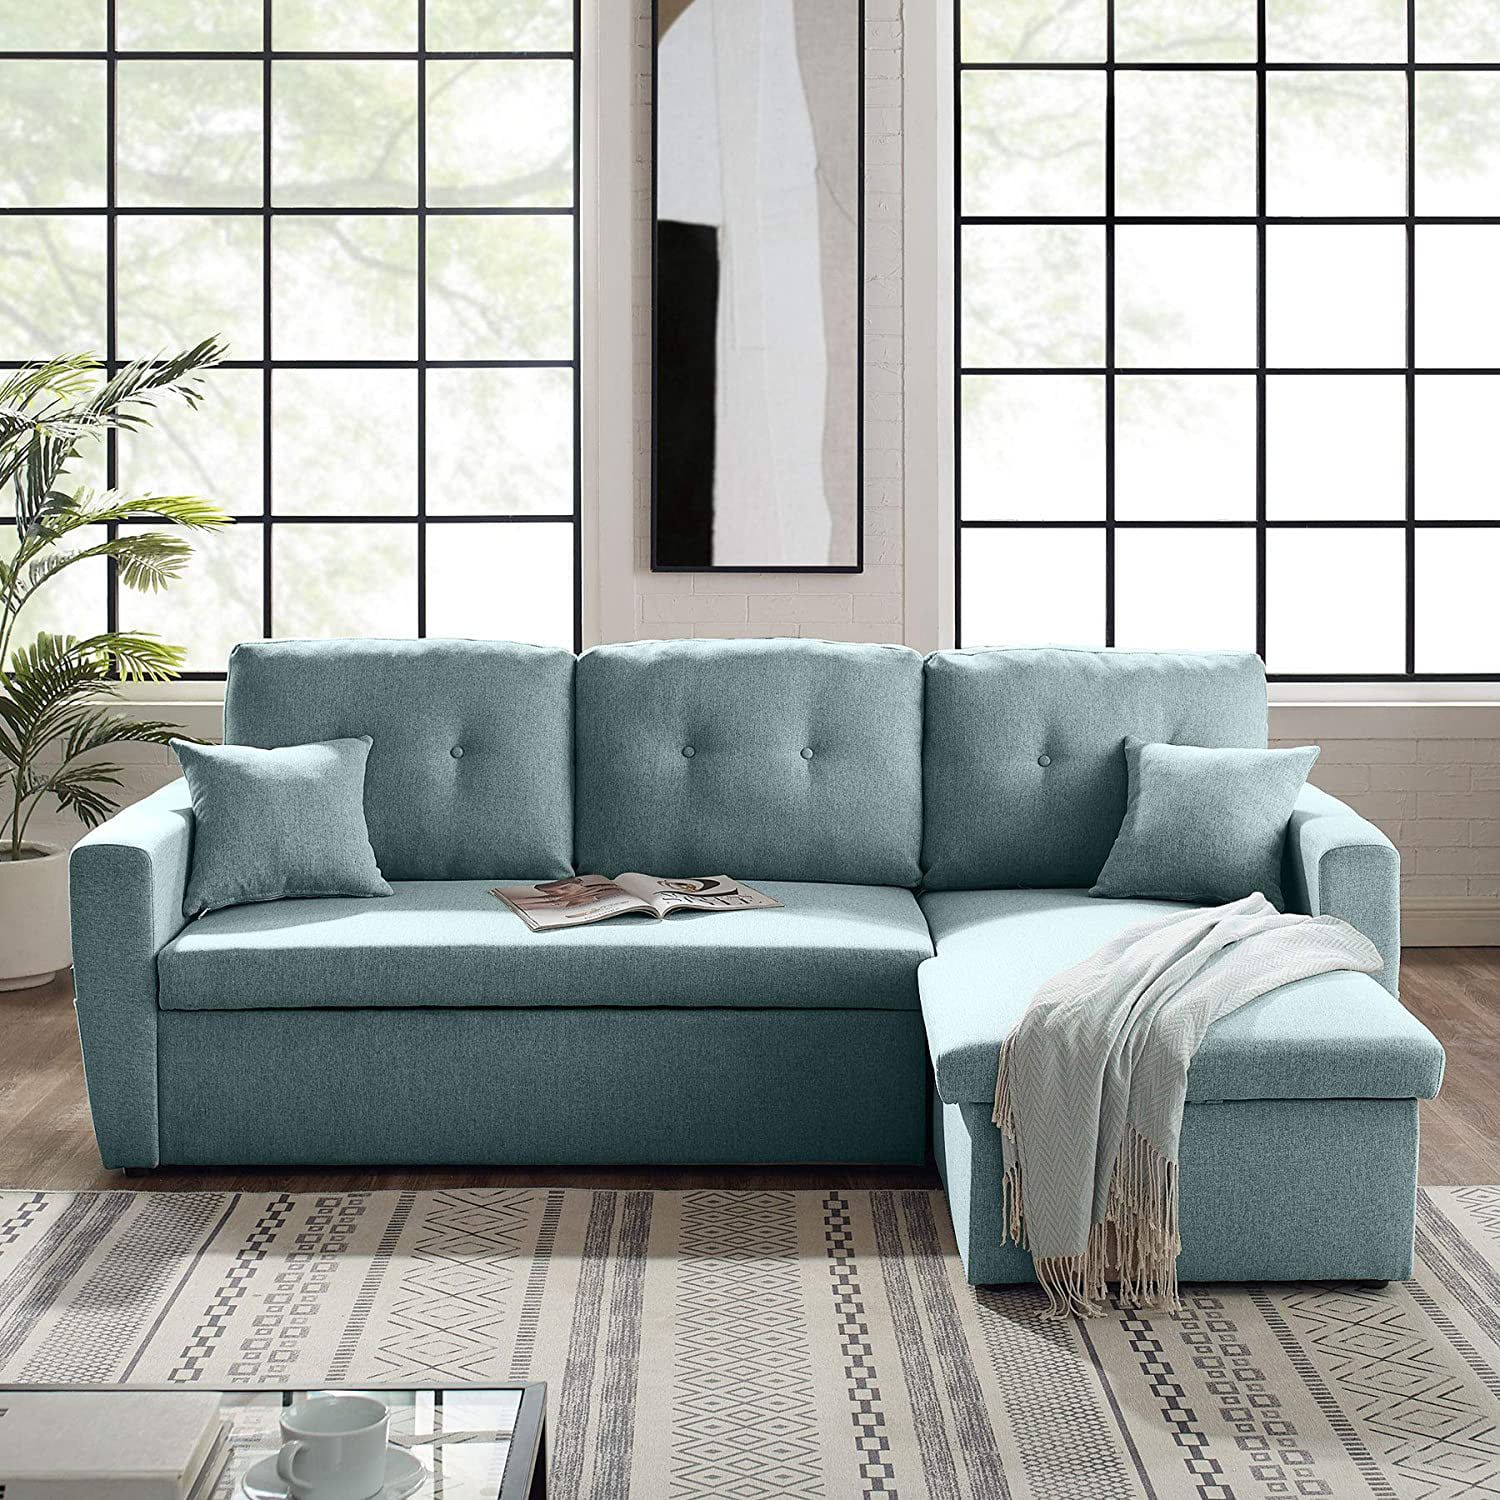 3 Seater Sofa Bed With Storage, Tribesigns 86.6” Convertible Sectional Inside 3 Seat Convertible Sectional Sofas (Gallery 1 of 20)